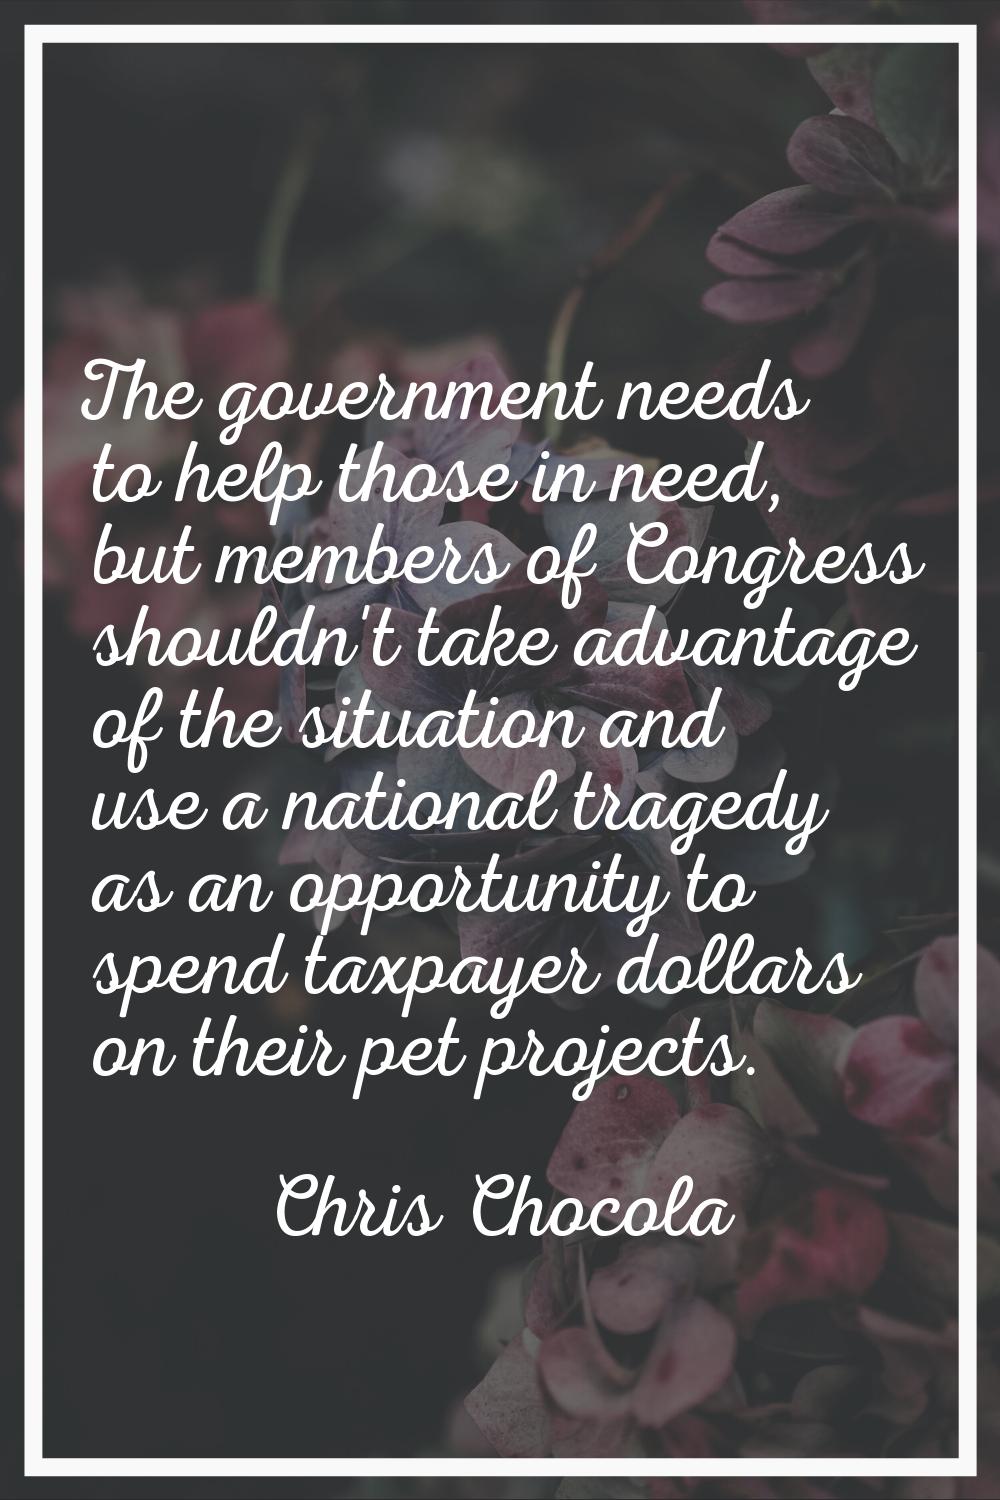 The government needs to help those in need, but members of Congress shouldn't take advantage of the